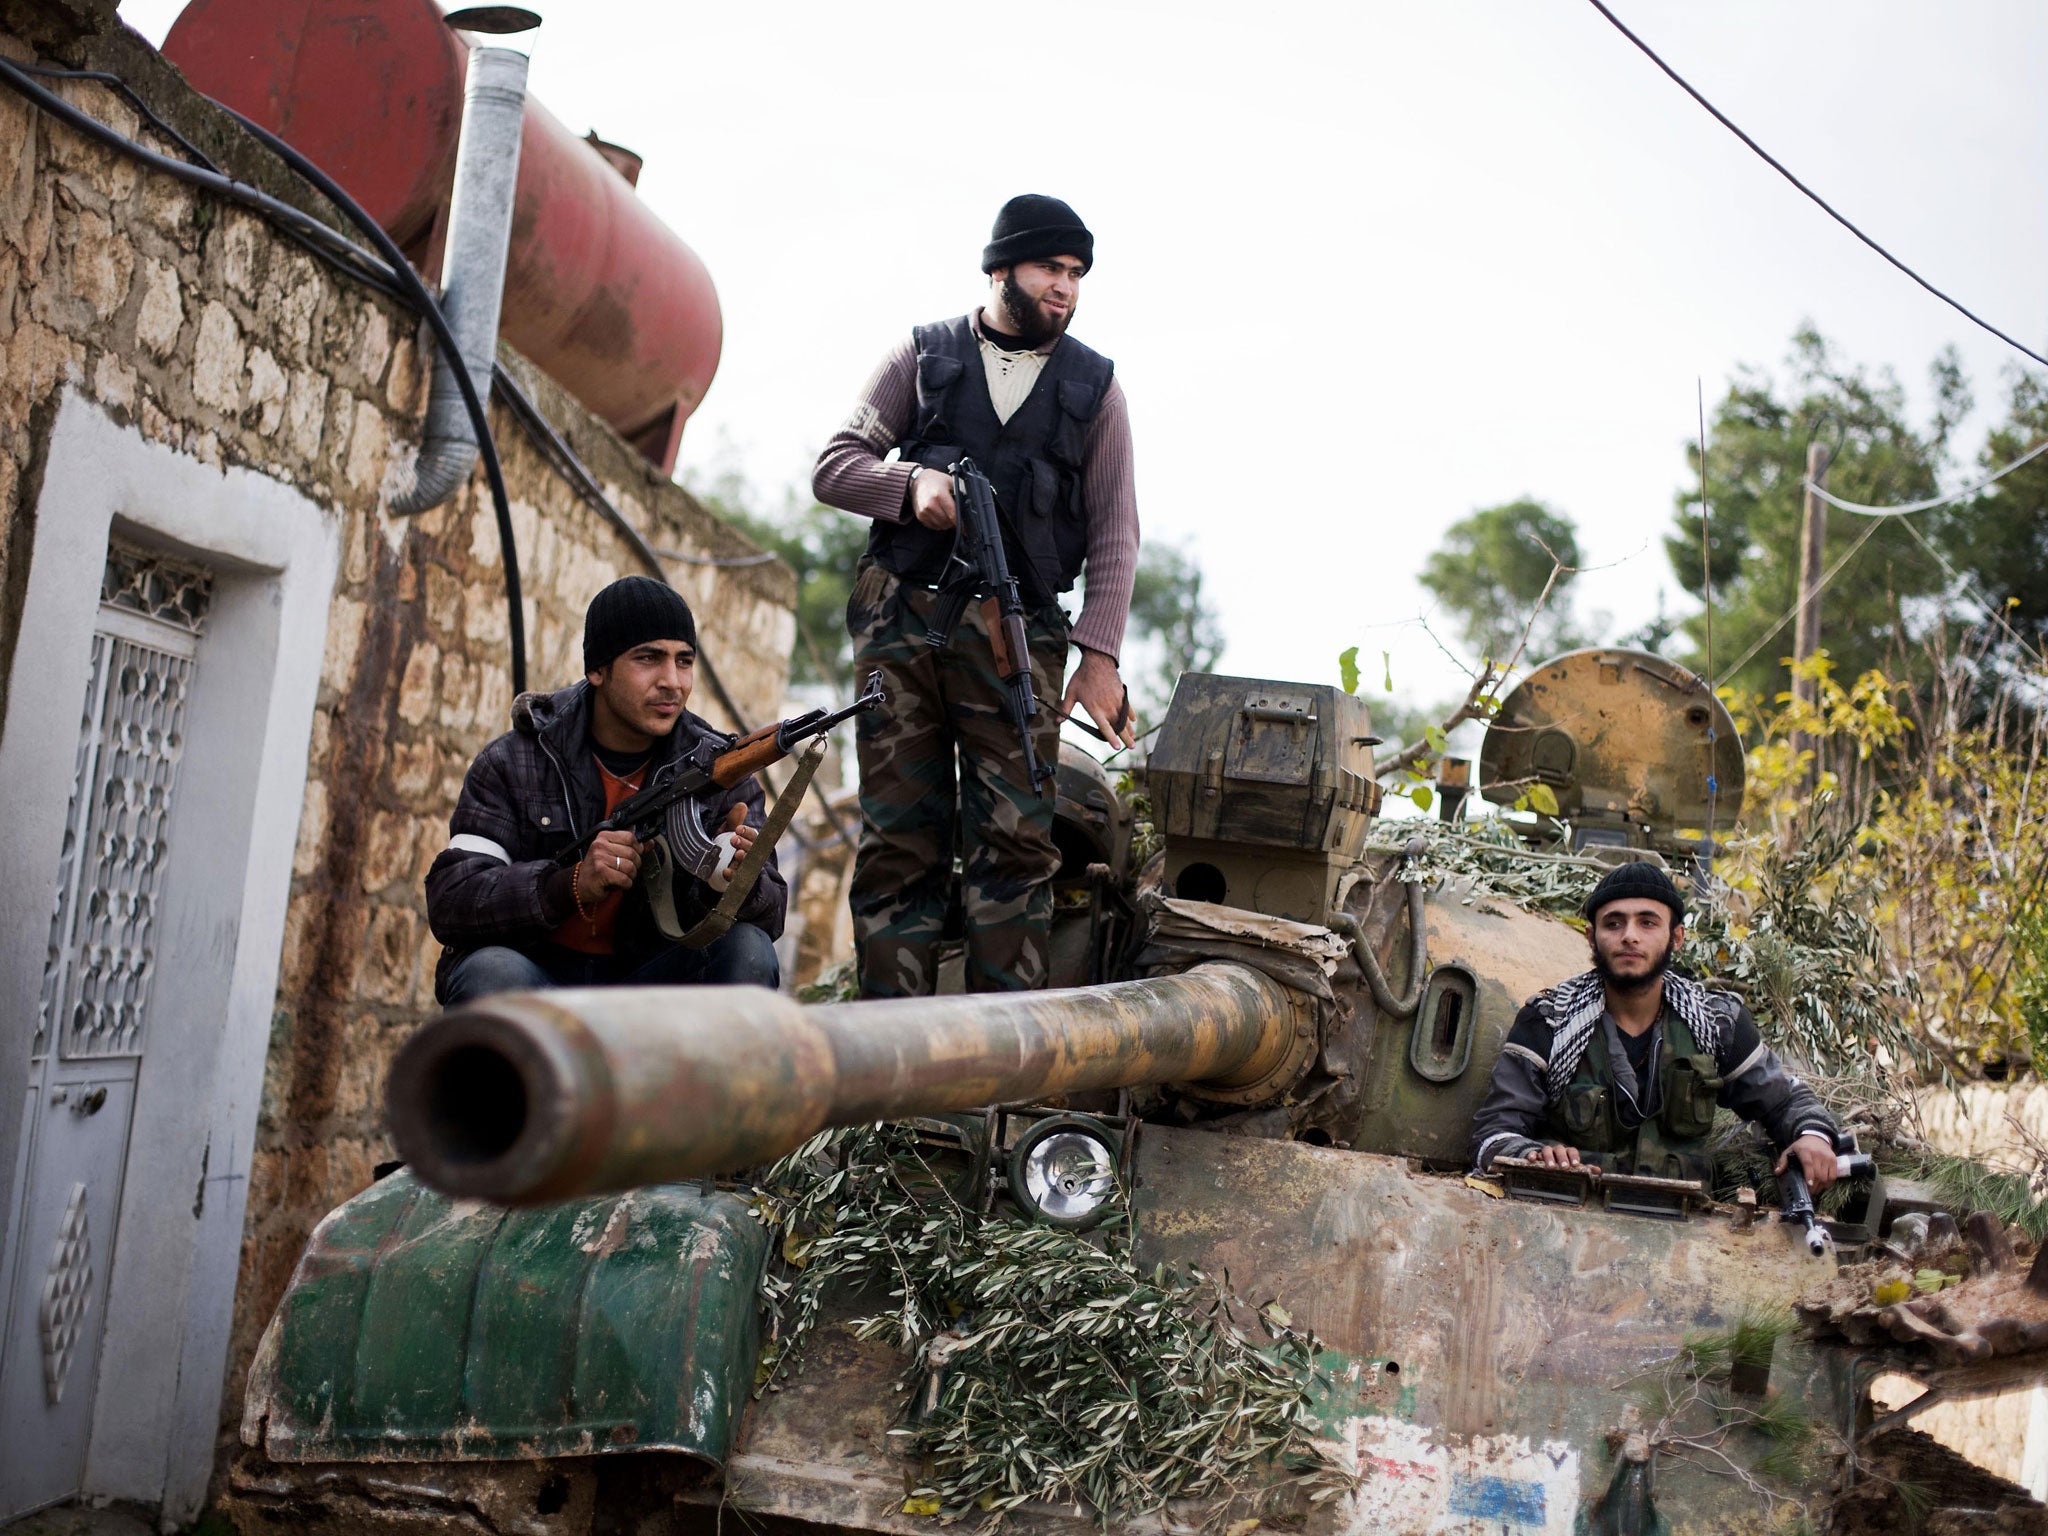 Kurdish members of the Free Syrian Army on a tank stolen from regime forces in the north of Aleppo province